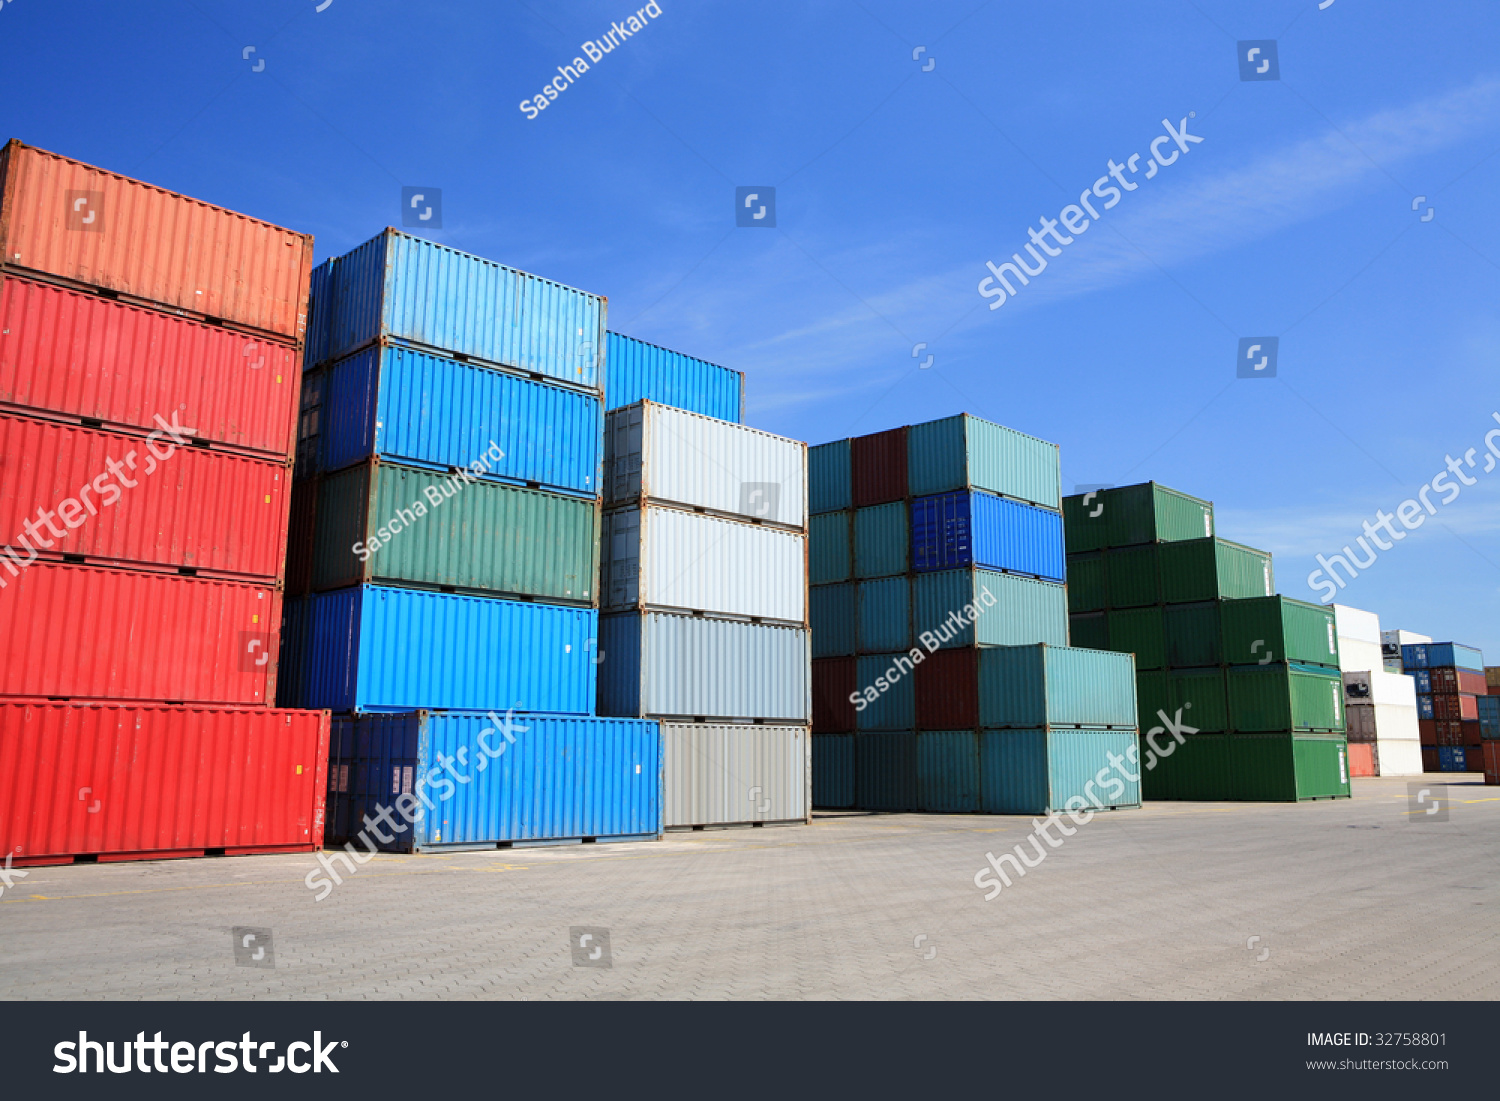 shipping containers - many cargo freight containers stacked in harbor #32758801